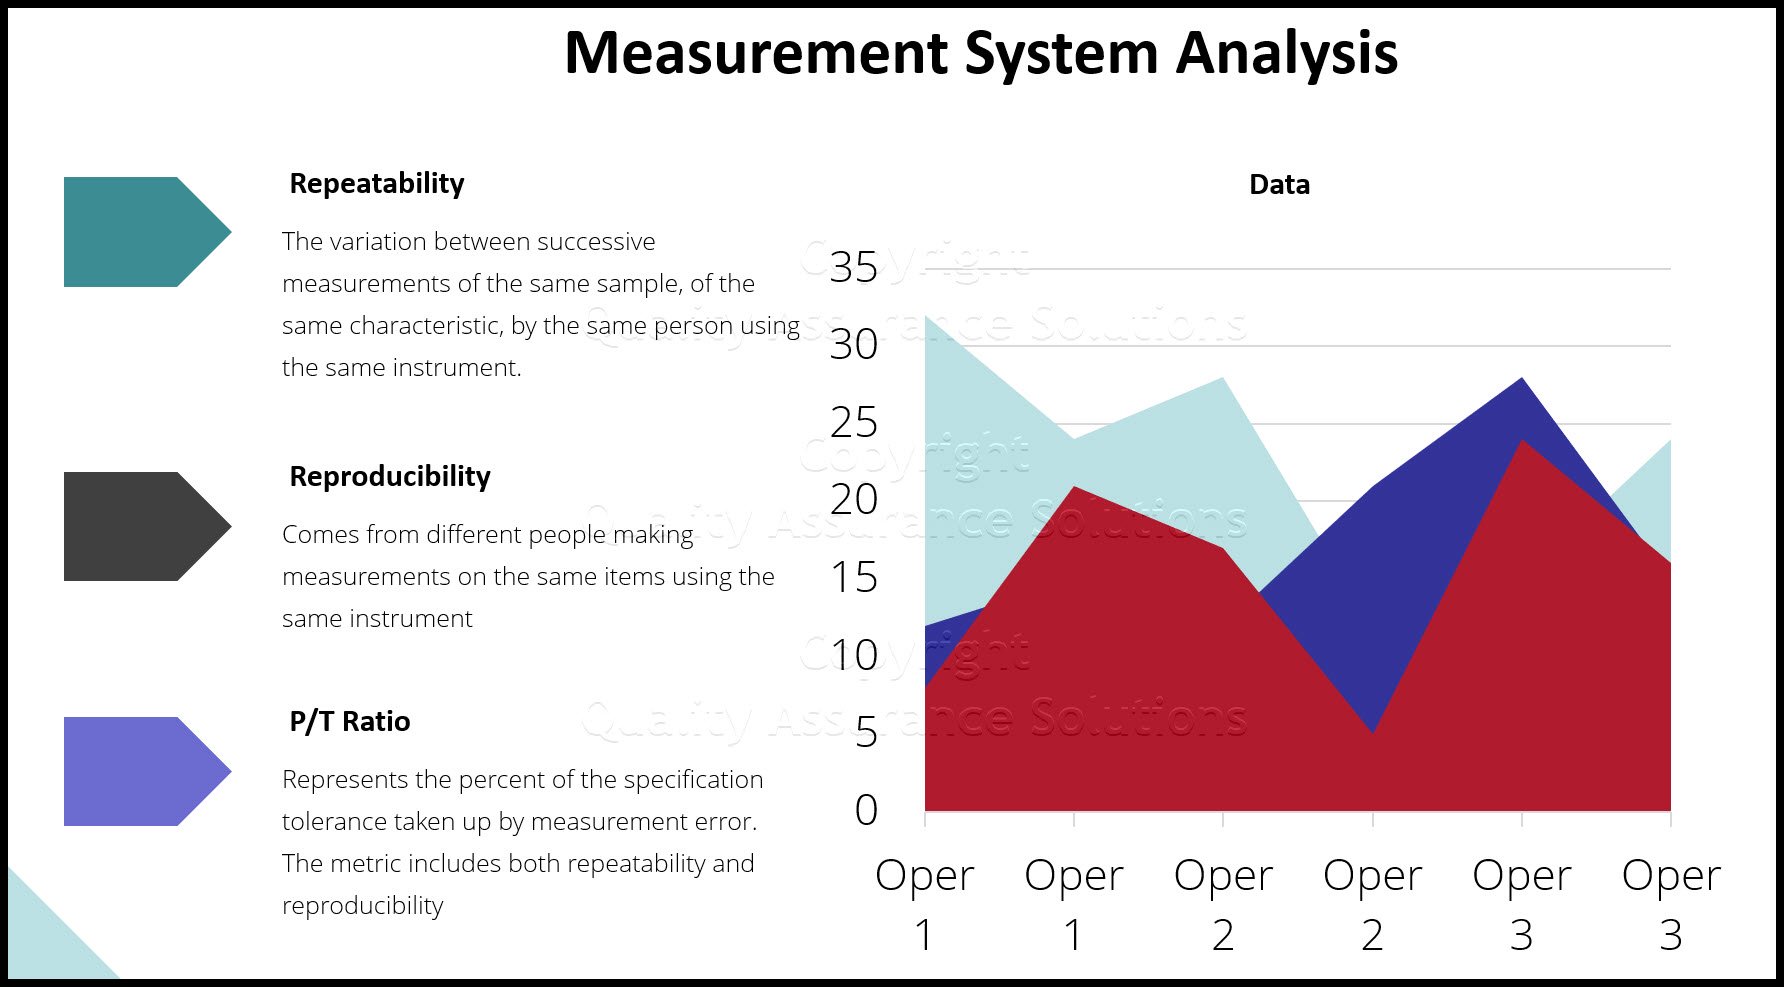 Learn how to evaluate your continuous data and assure satisfactory inspection. Without conducting an MSA on your data set, you put your inspection data at risk. 